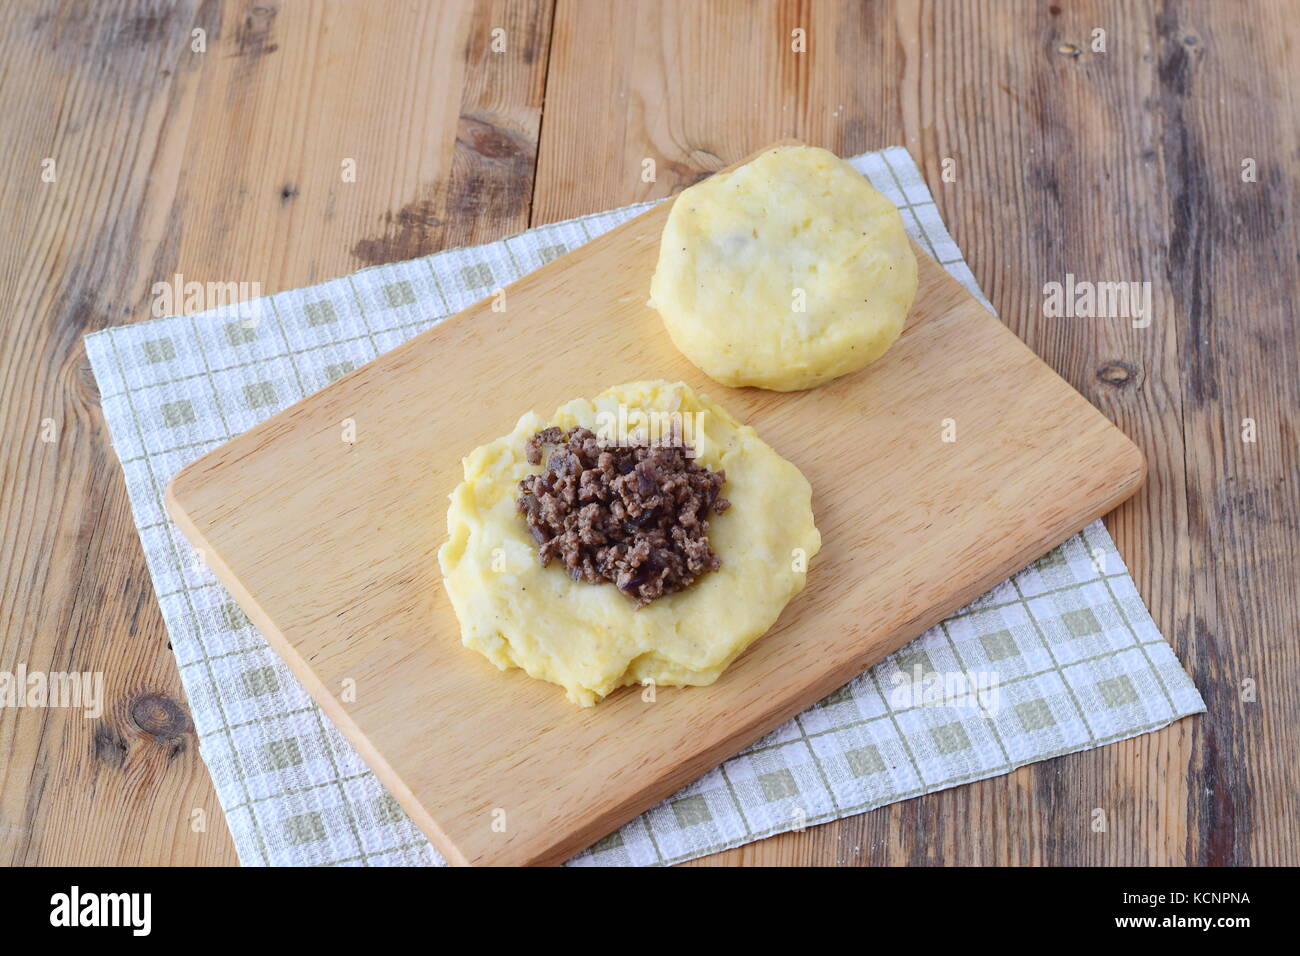 Potato dumplings stuffed with minced meat on a wooden cutting board. Step by step cooking. Healthy eating concept Stock Photo